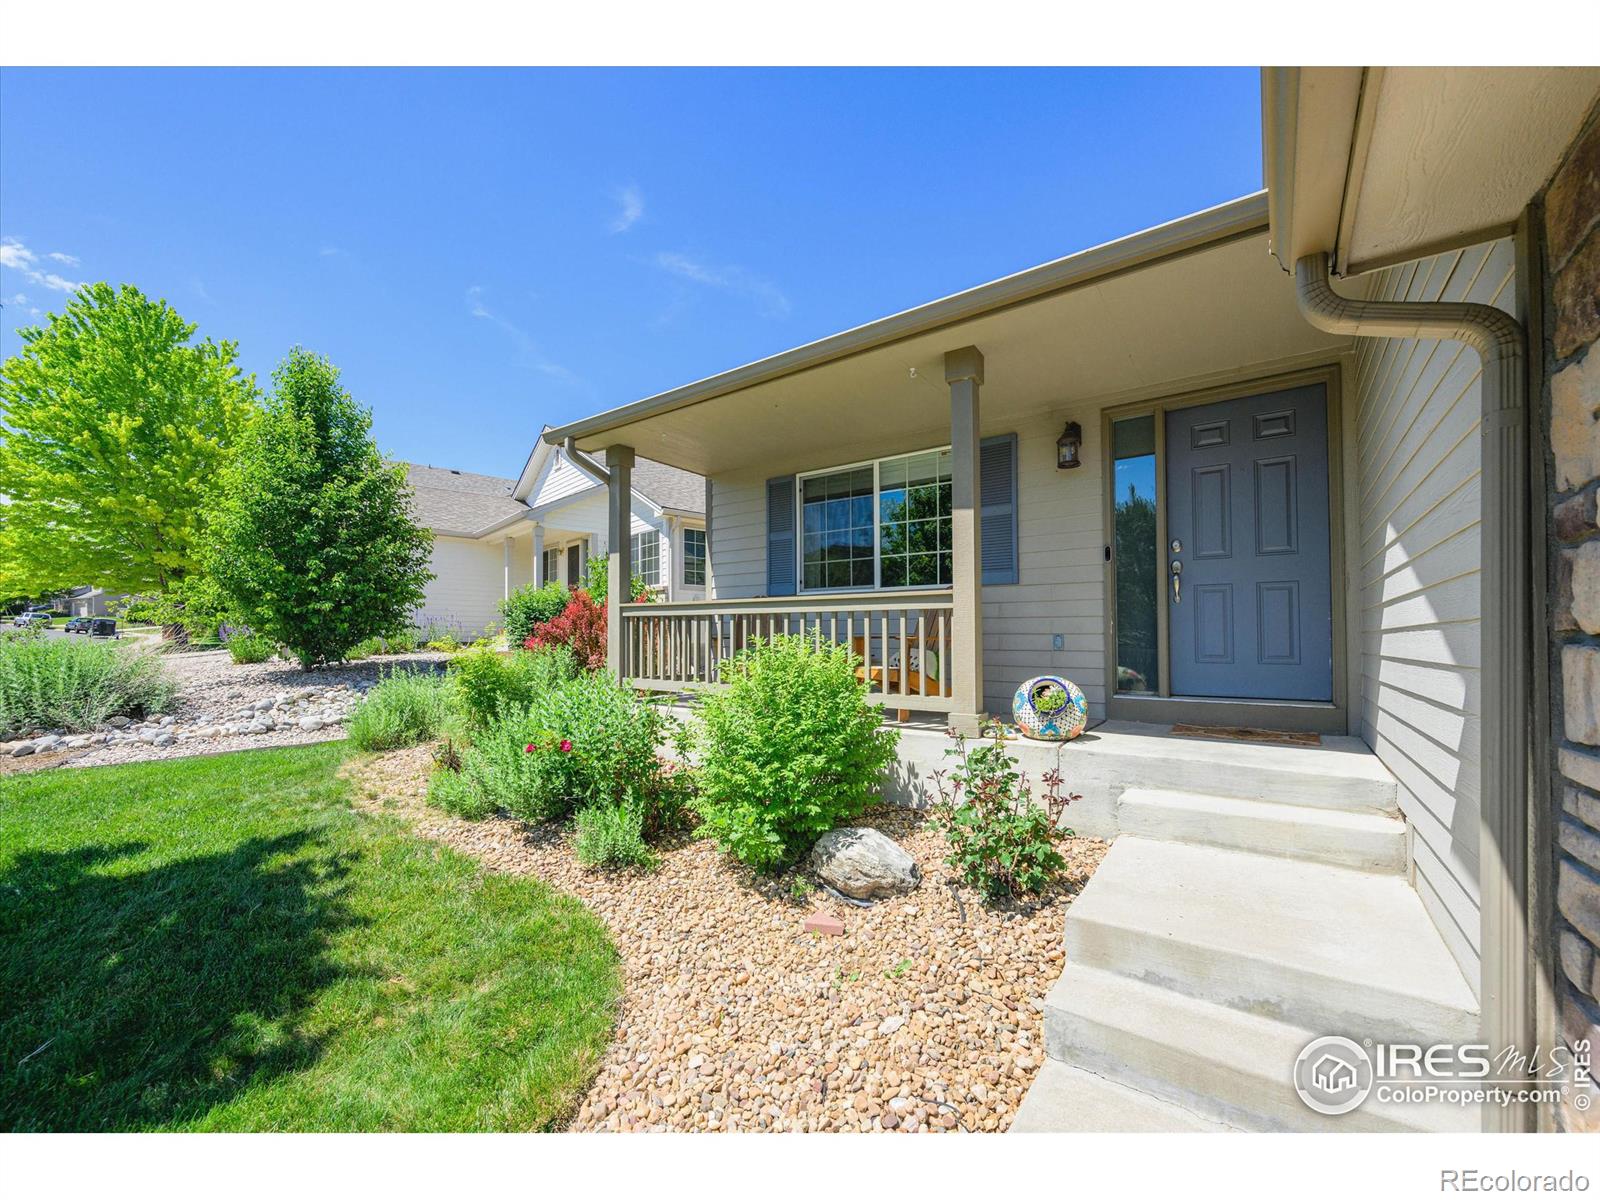 Report Image for 456  Peyton Drive,Fort Collins, Colorado